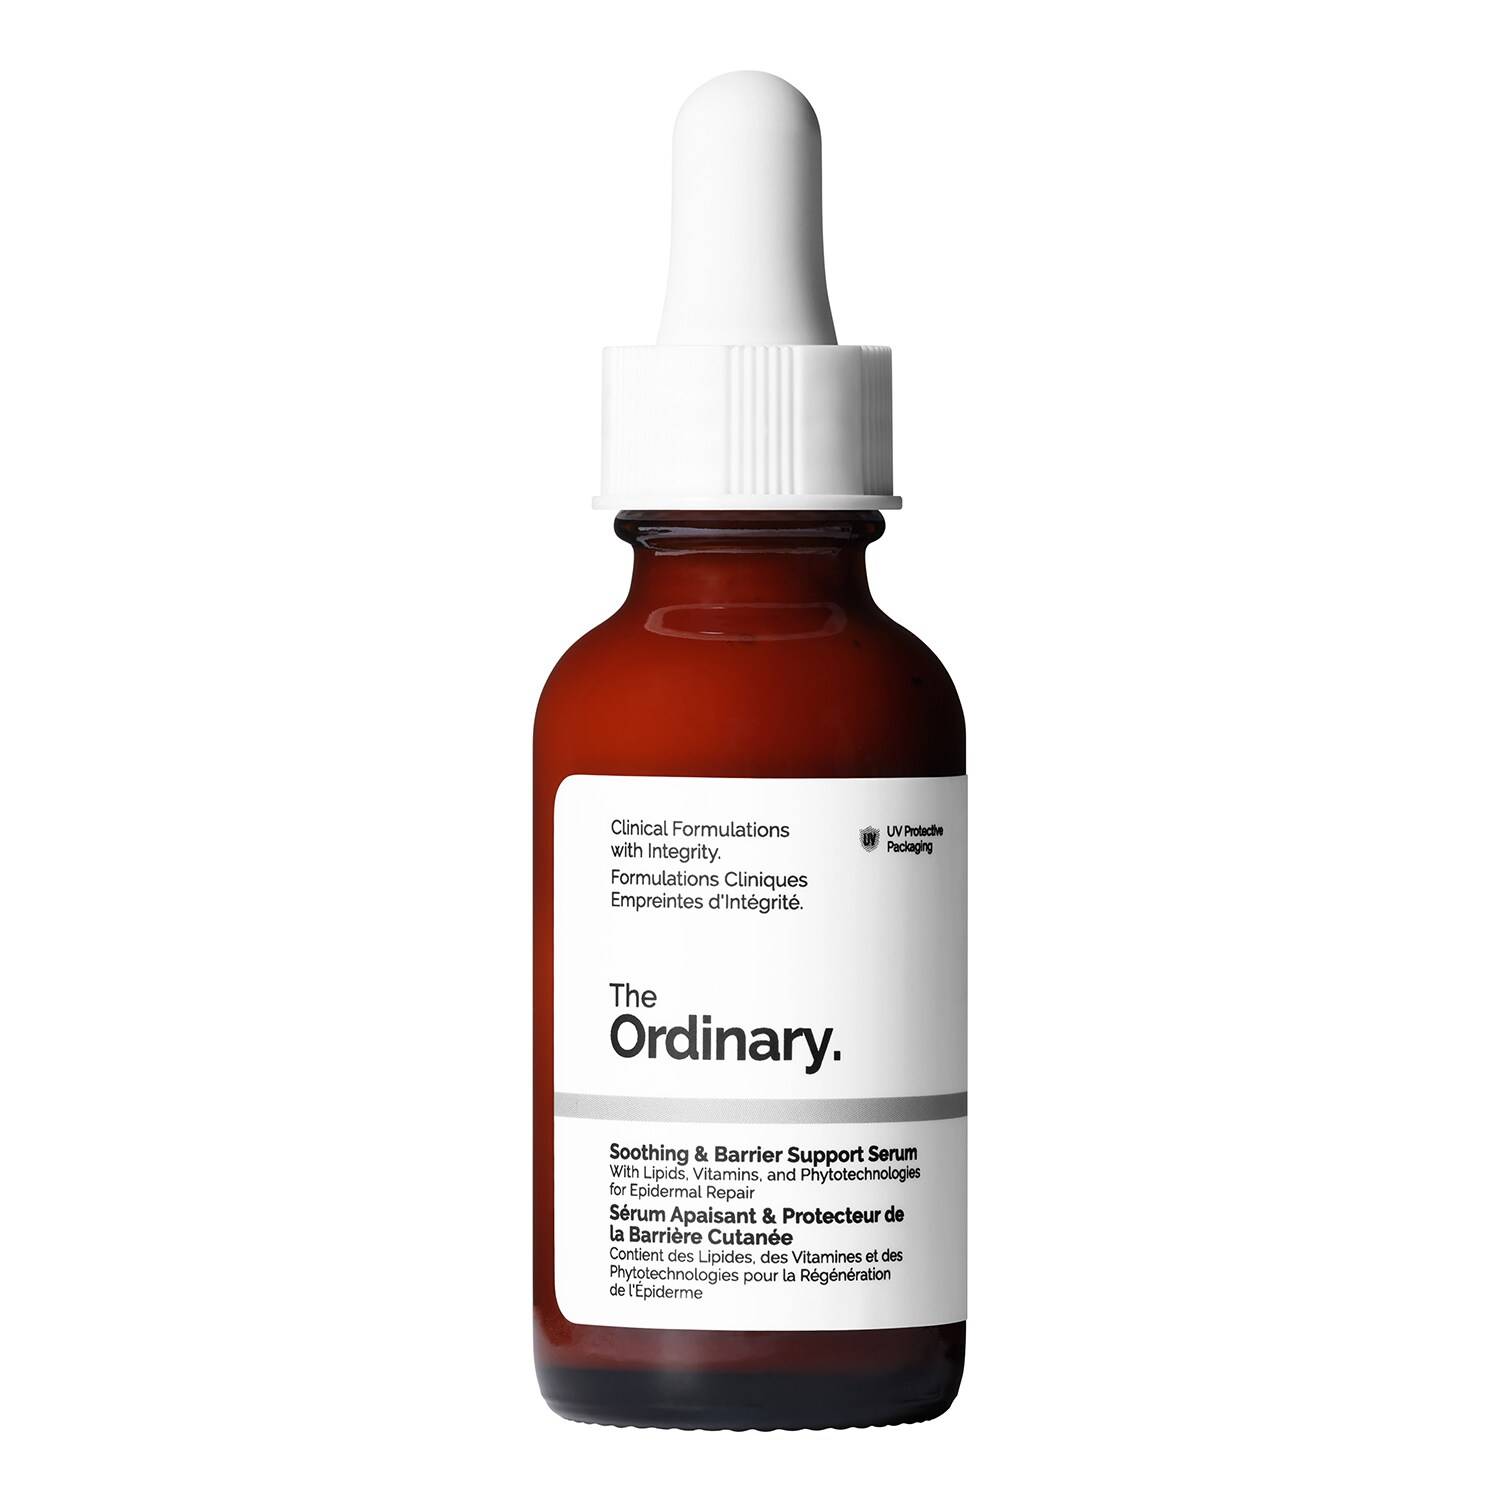 THE ORDINARY Soothing & Barrier Support Serum 30ml